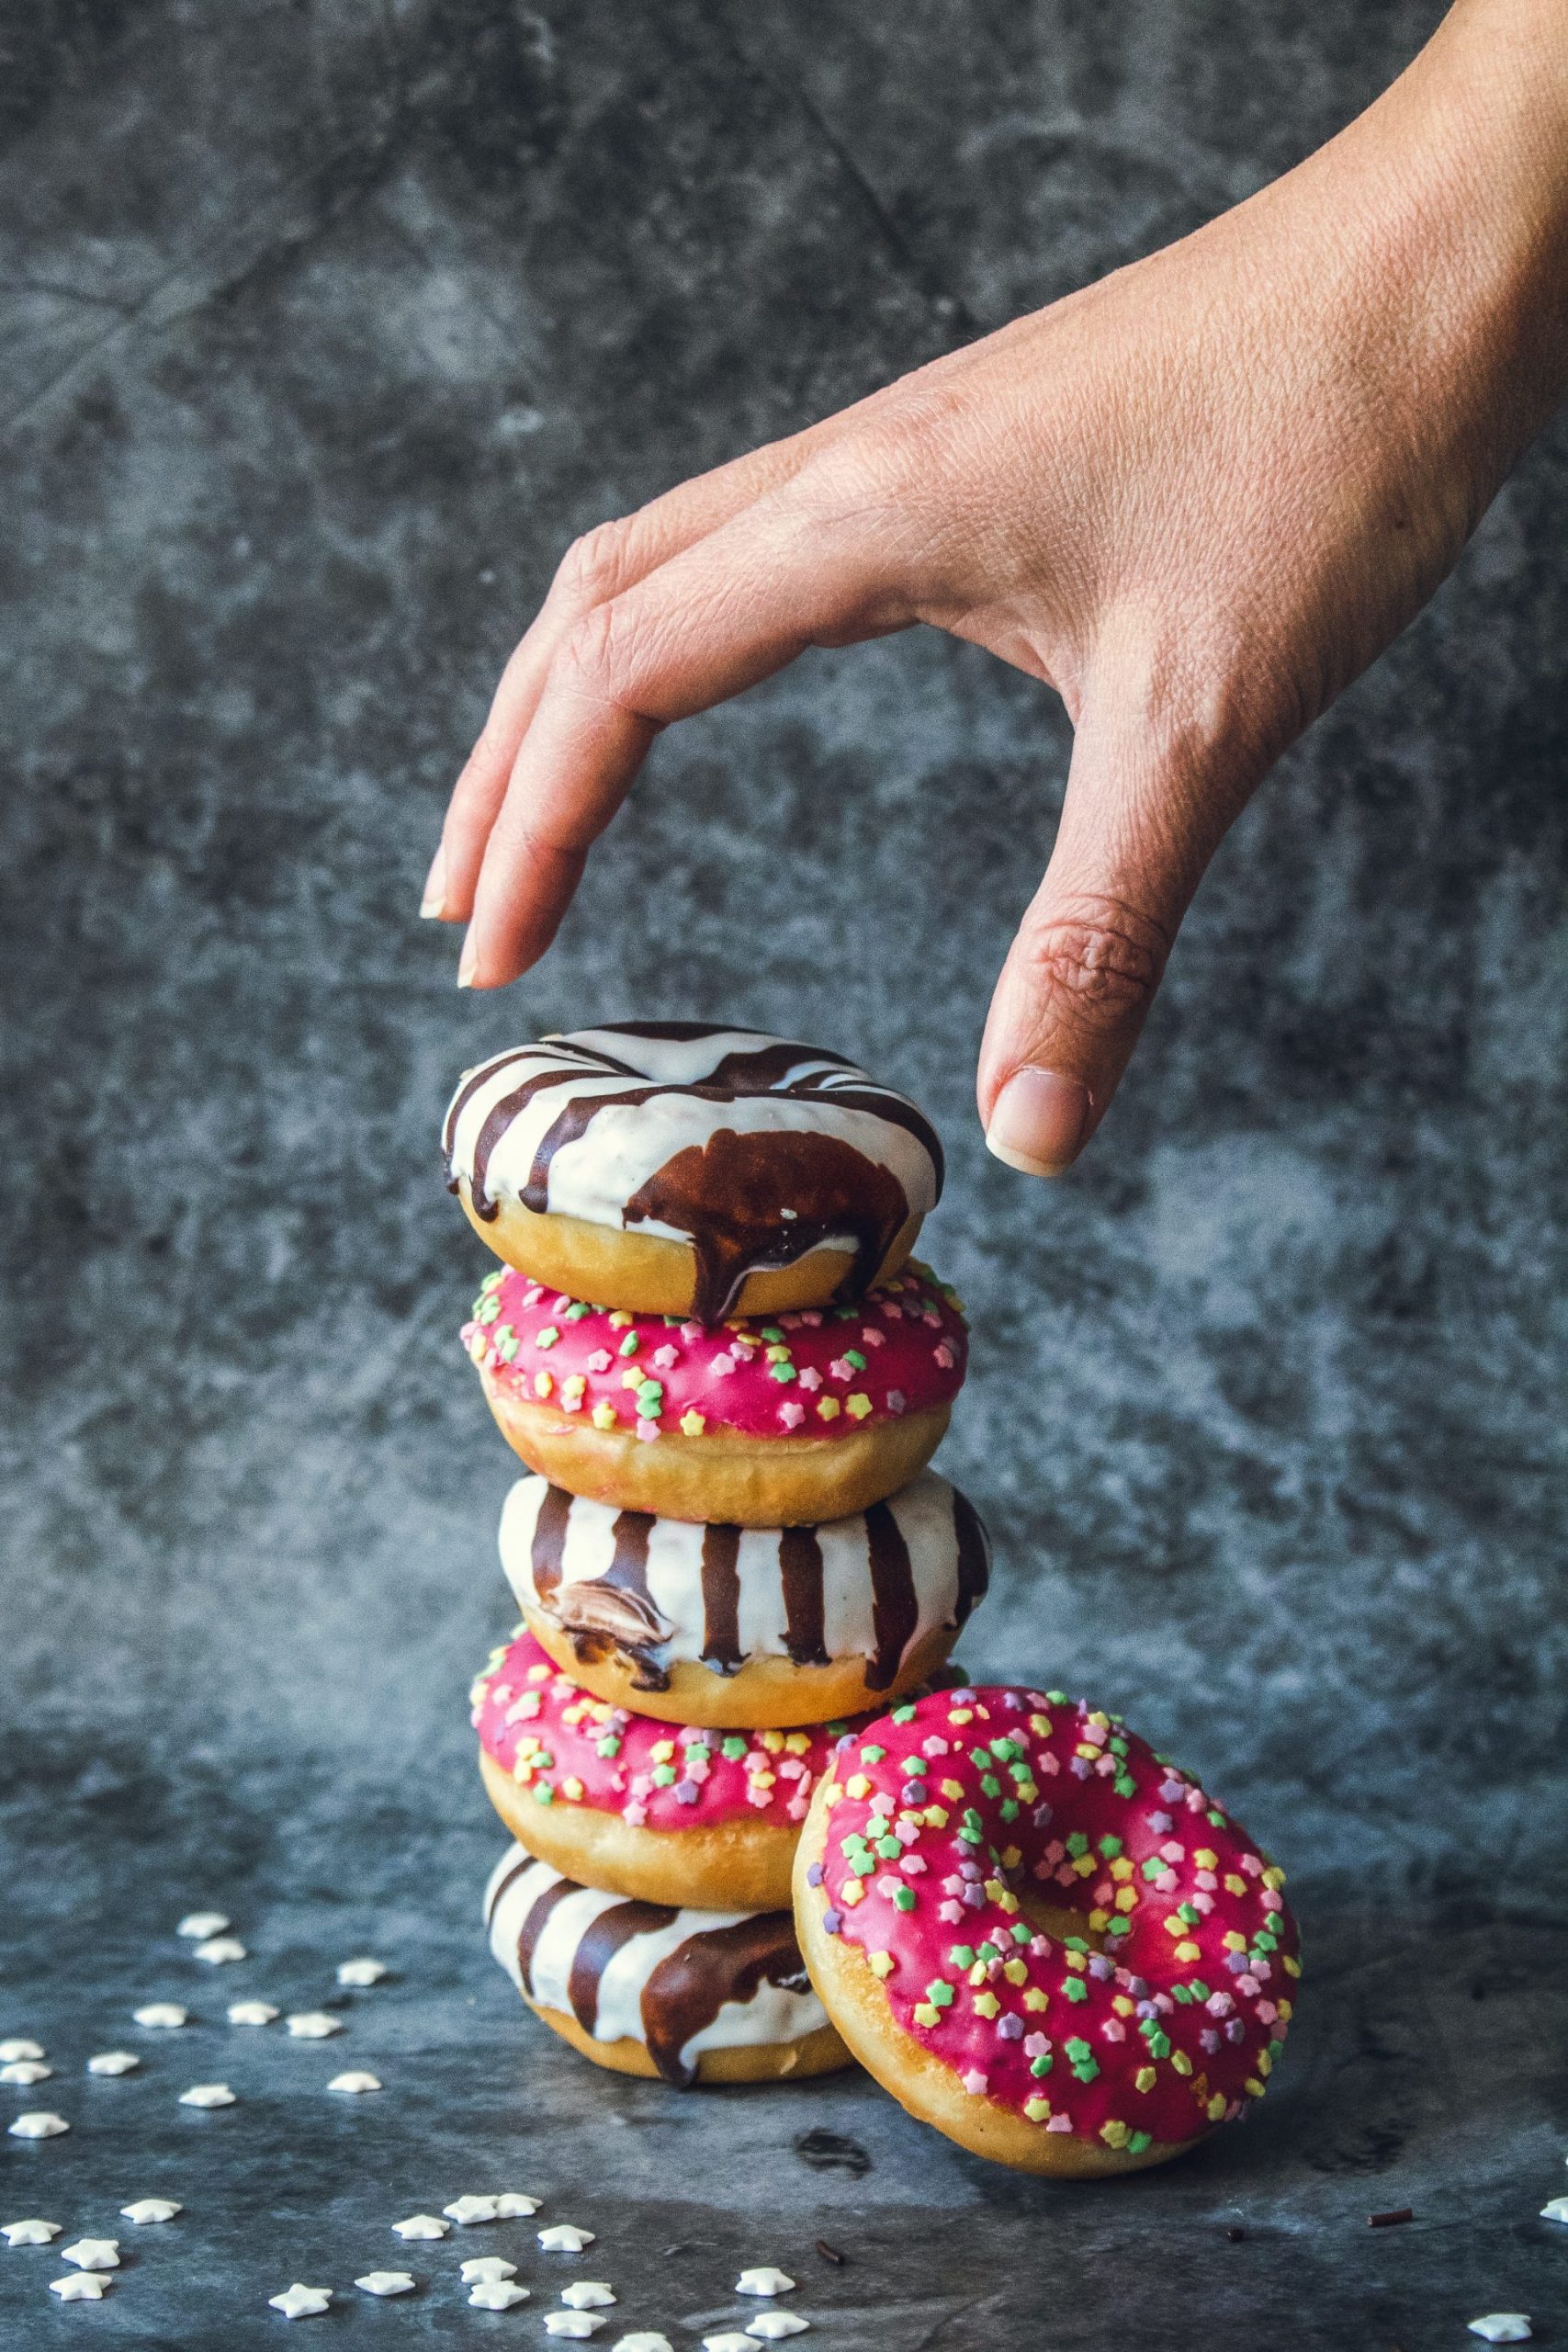 Stack of donuts containing processed sugar which can cause acne in some